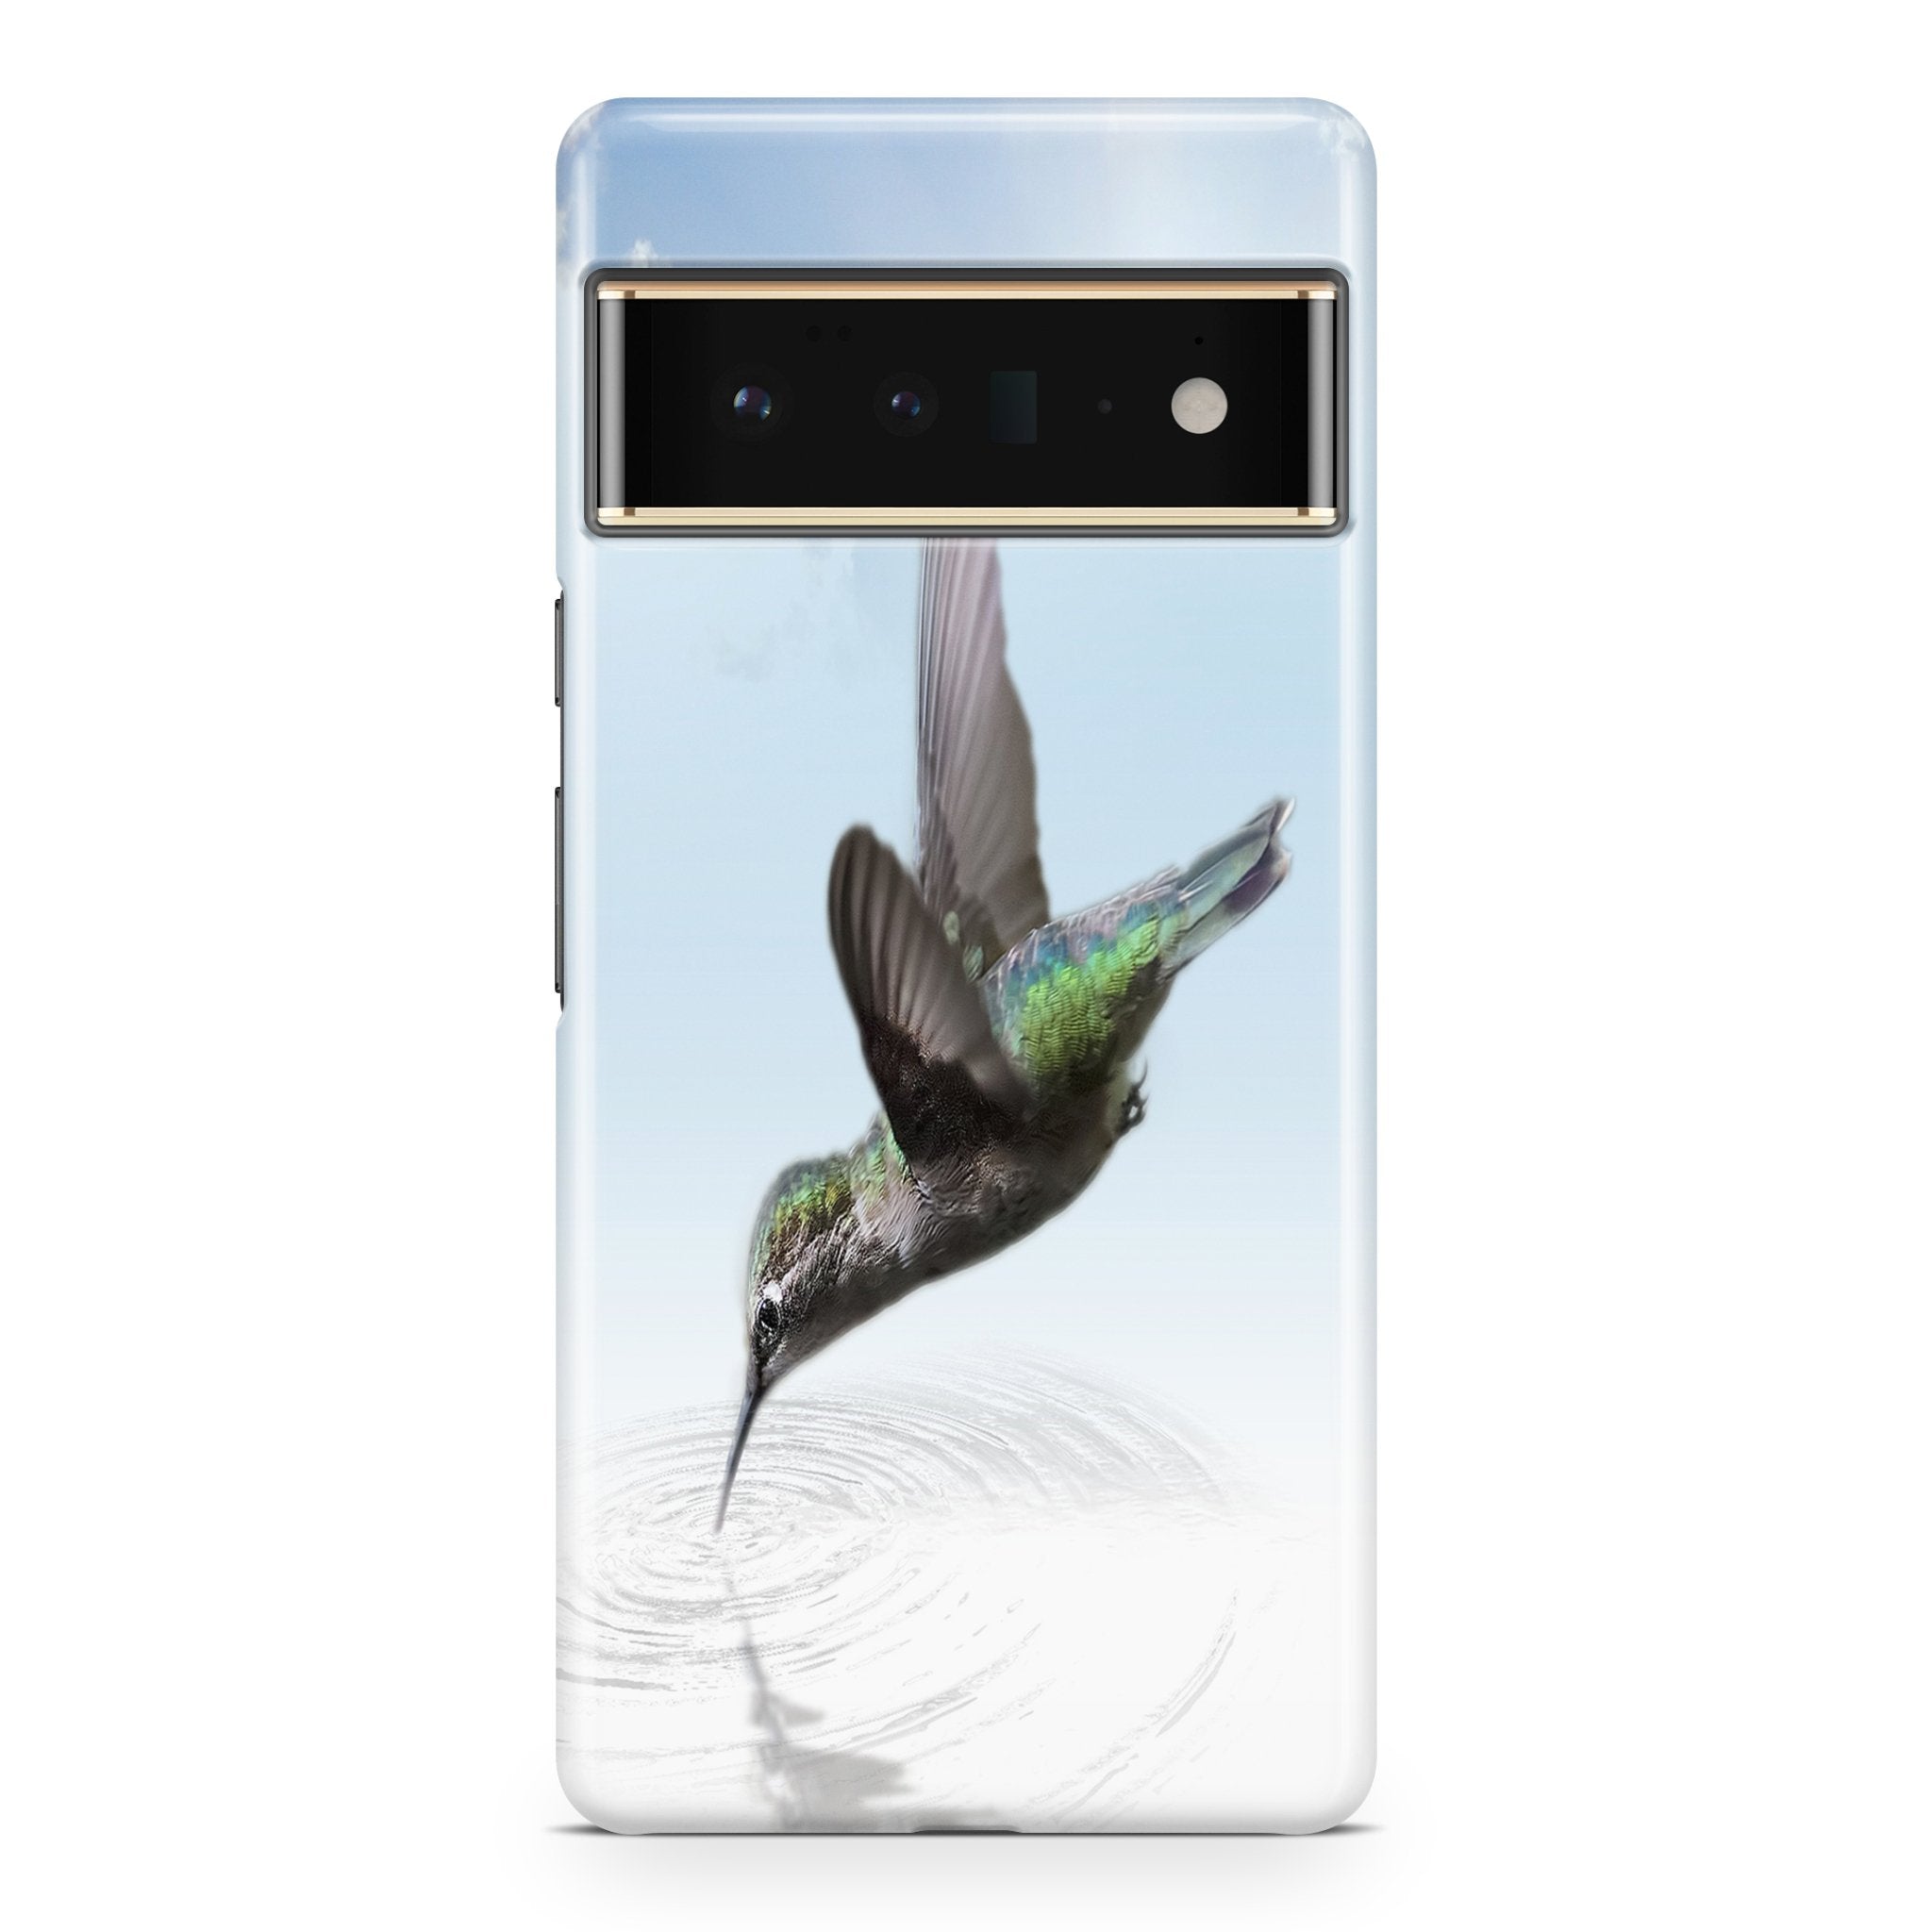 Simple Hummingbird - Google phone case designs by CaseSwagger